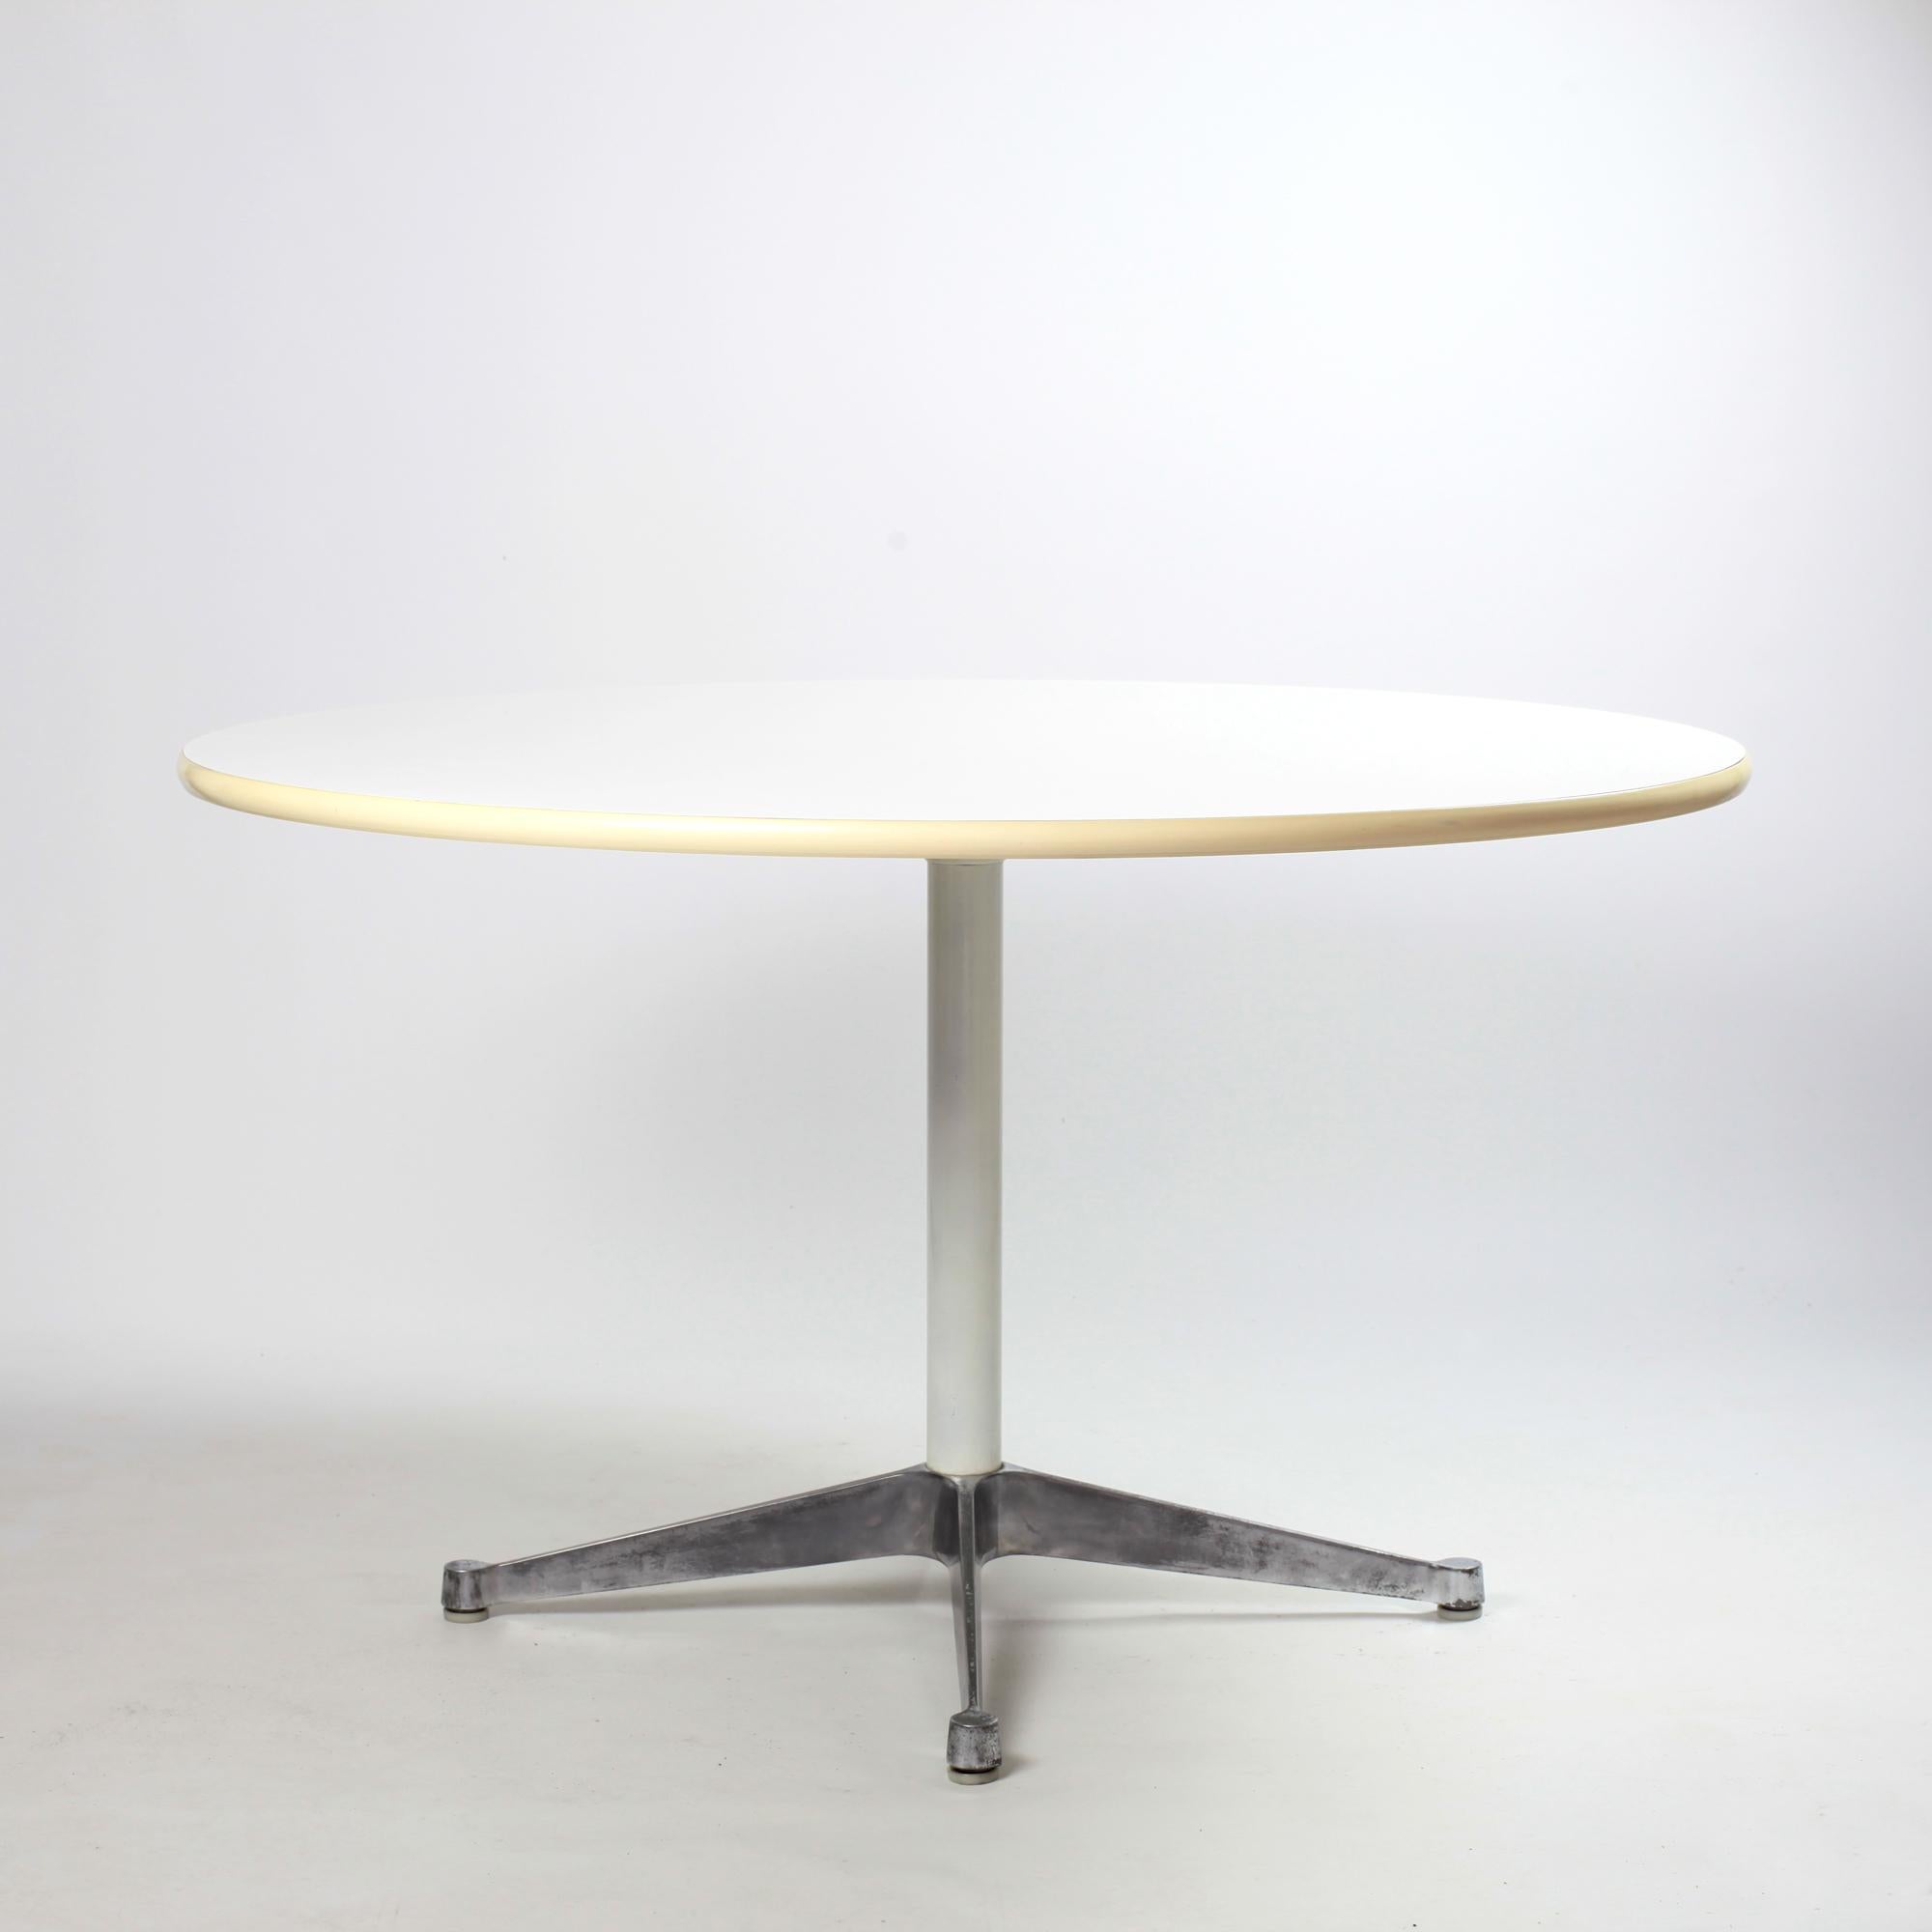 Beautiful early dining table with contract base by Charles and Ray Eames for Herman Miller. 
The table has an aluminum contract base and white formica table top framed with rubber edge. 
Very good vintage condition.